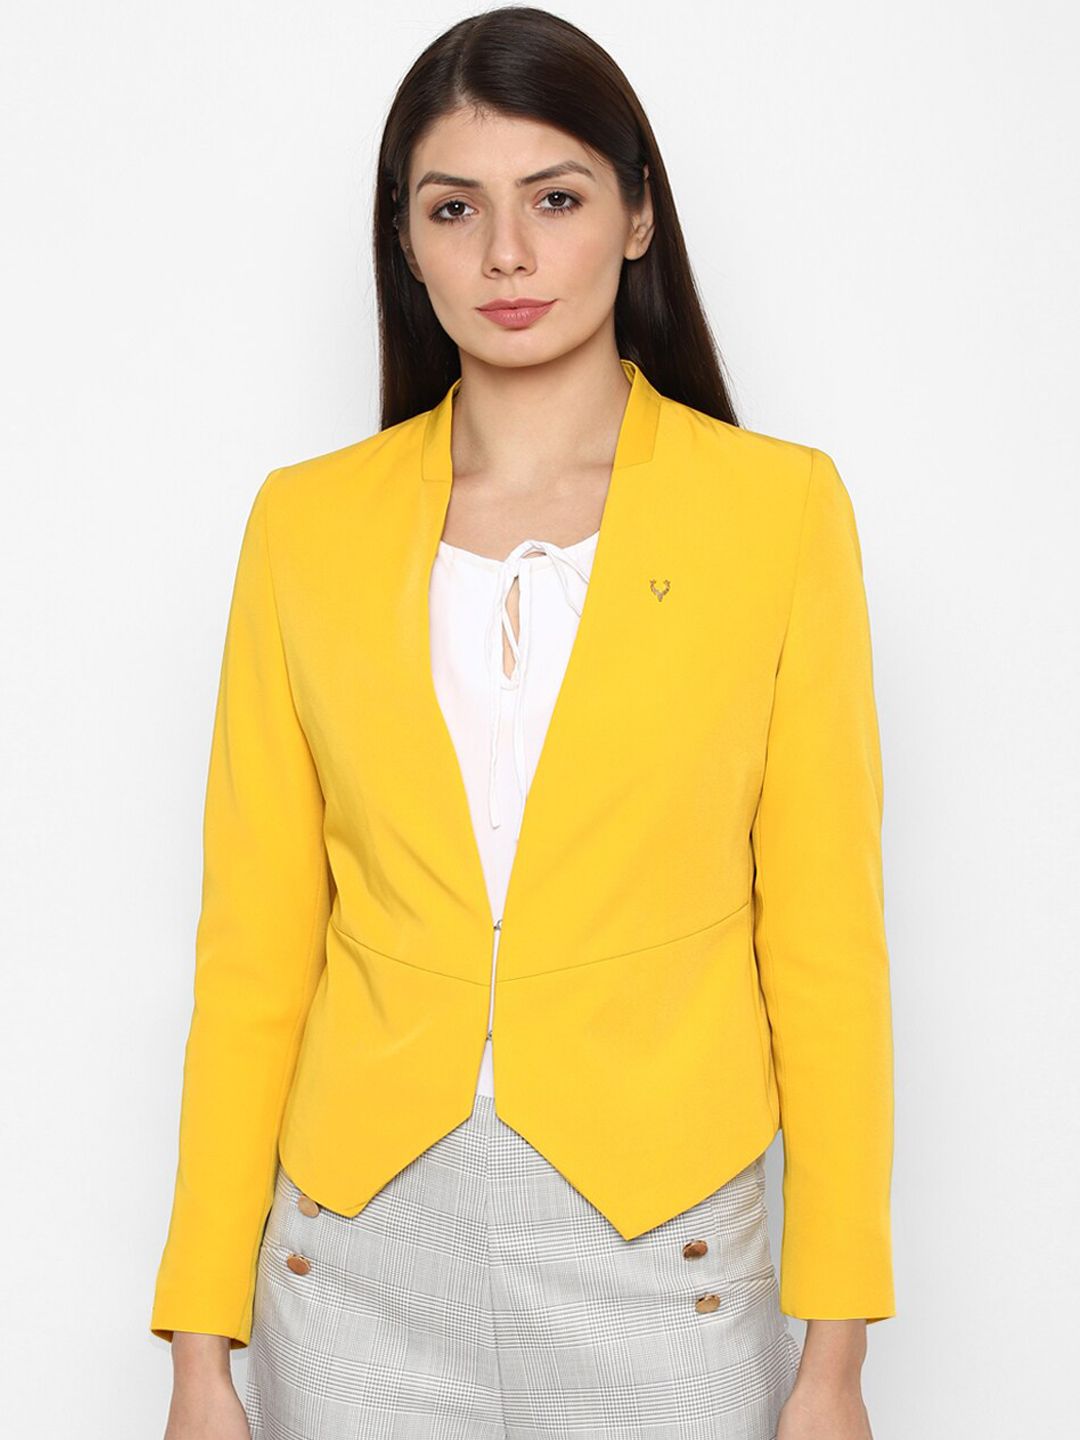 Allen Solly Woman Yellow Open Front Blazer Price in India